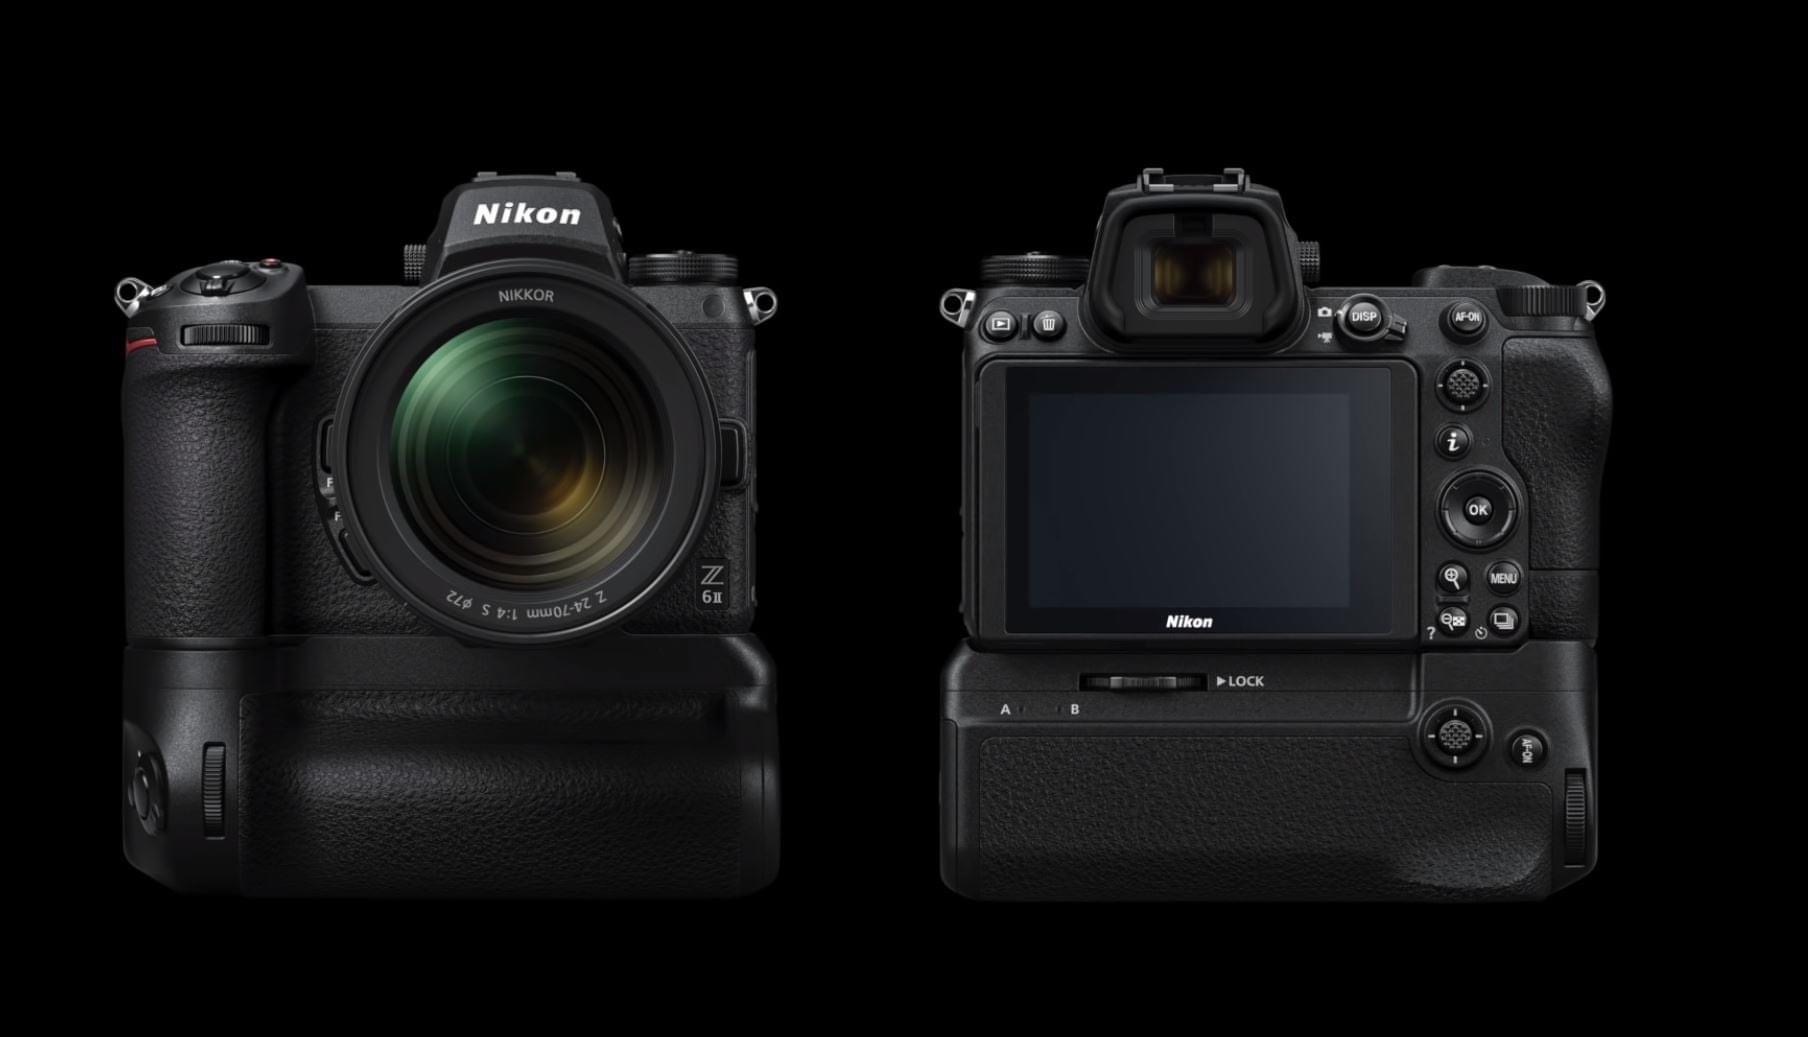 The new Nikon MB-N11 multi battery power pack with vertical grip